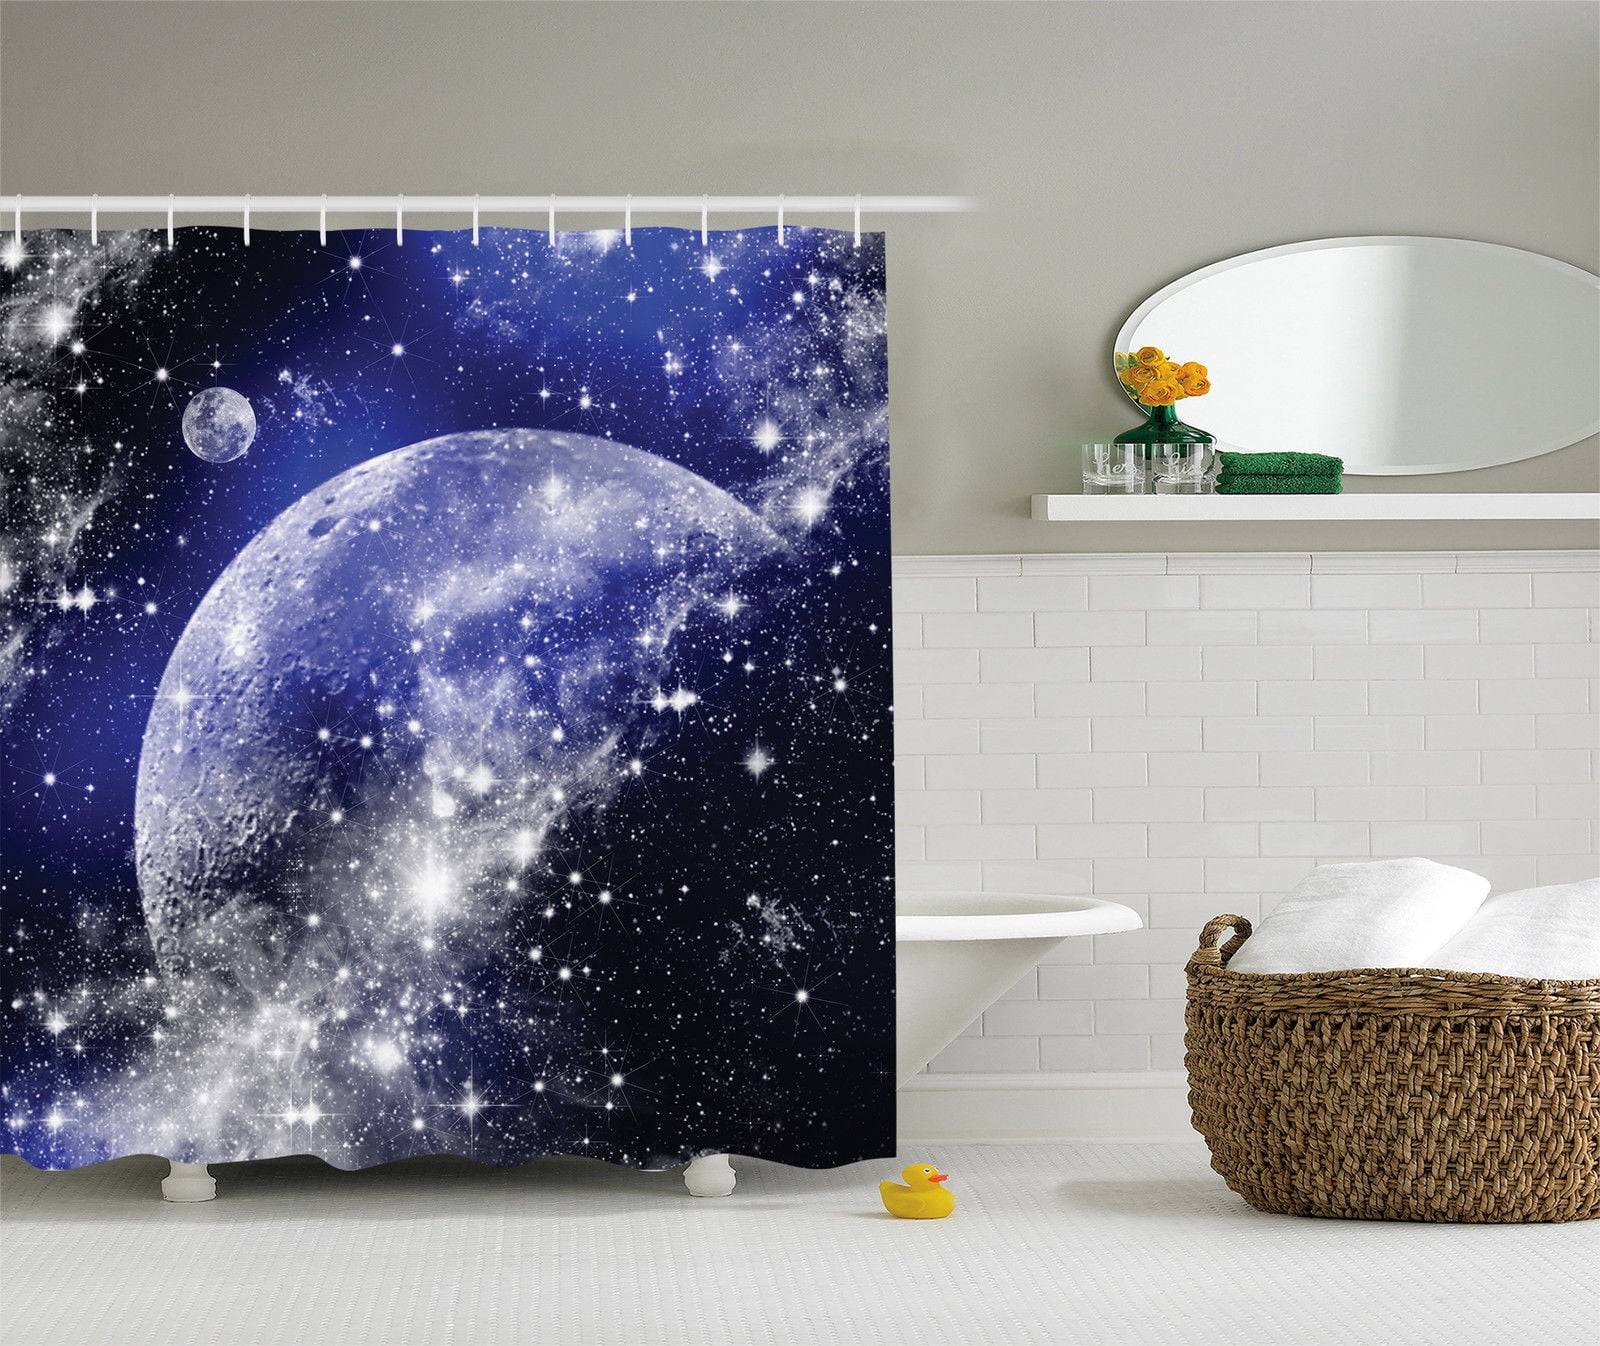 Abstract Space Decor Science Fiction Galaxy Milkyway Atmosphere Shower Curtain 